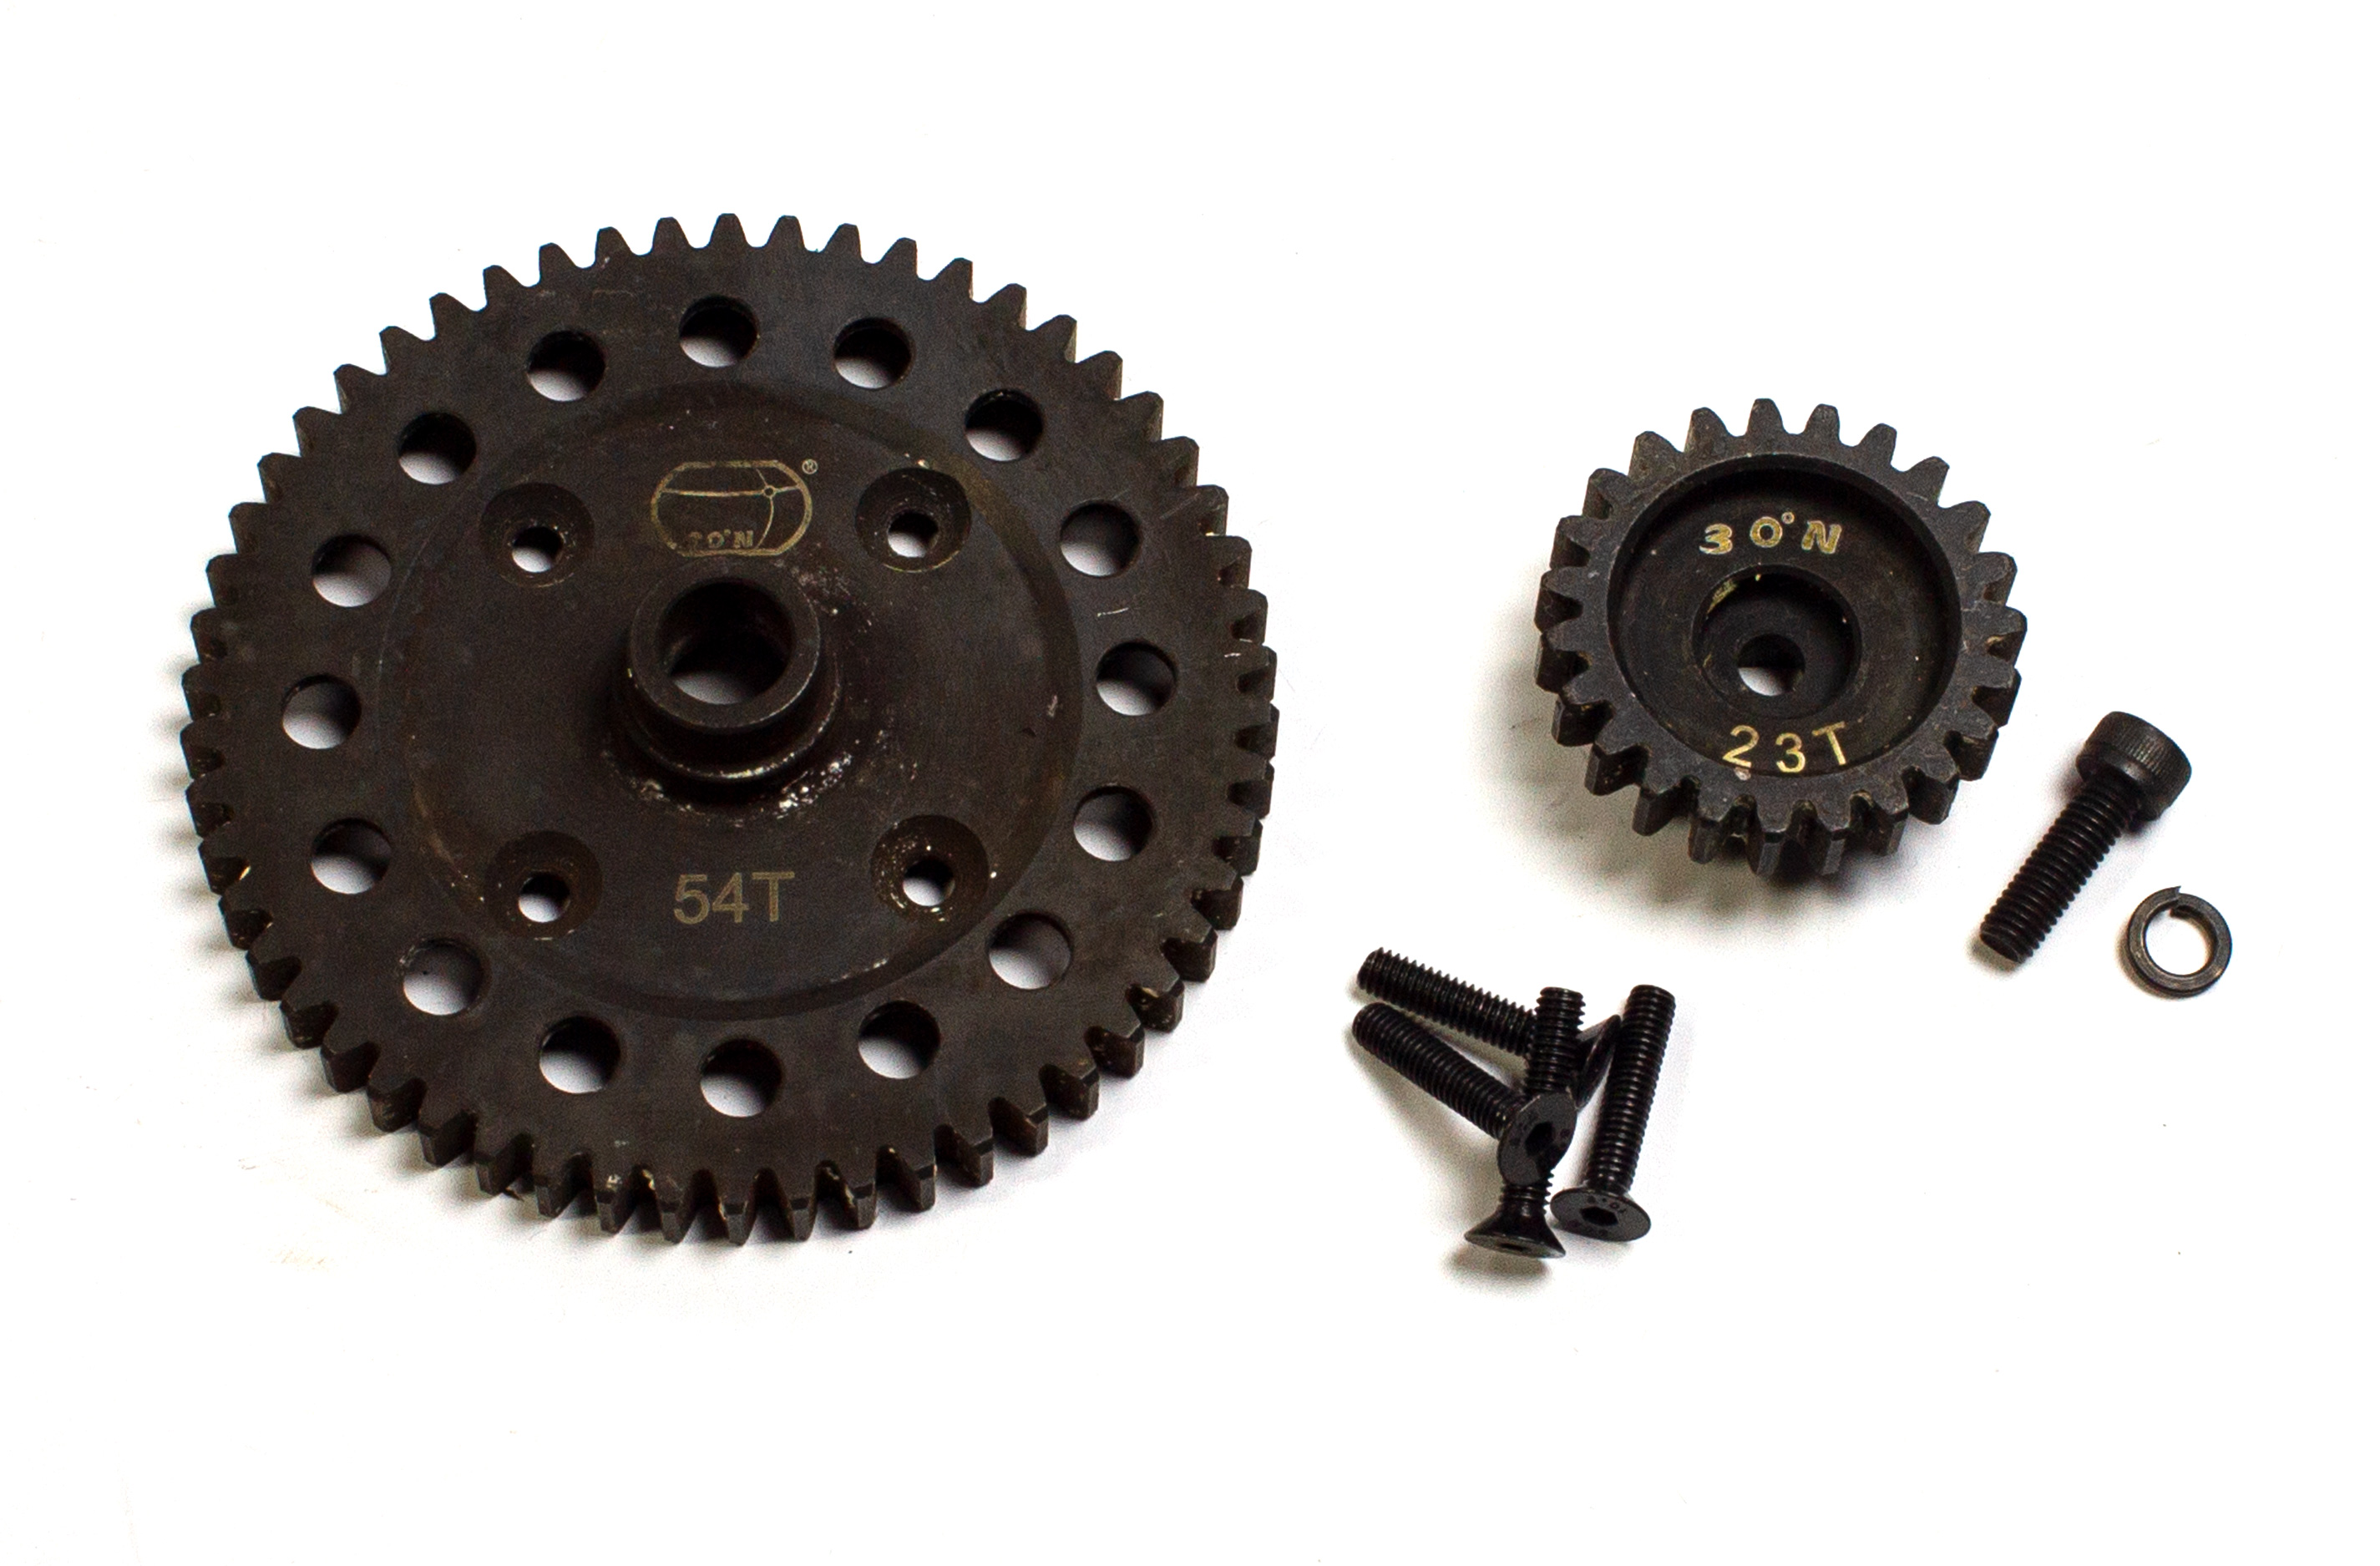 TLR252007/5044 On-road gear set for Losi 5ive-T 1.0